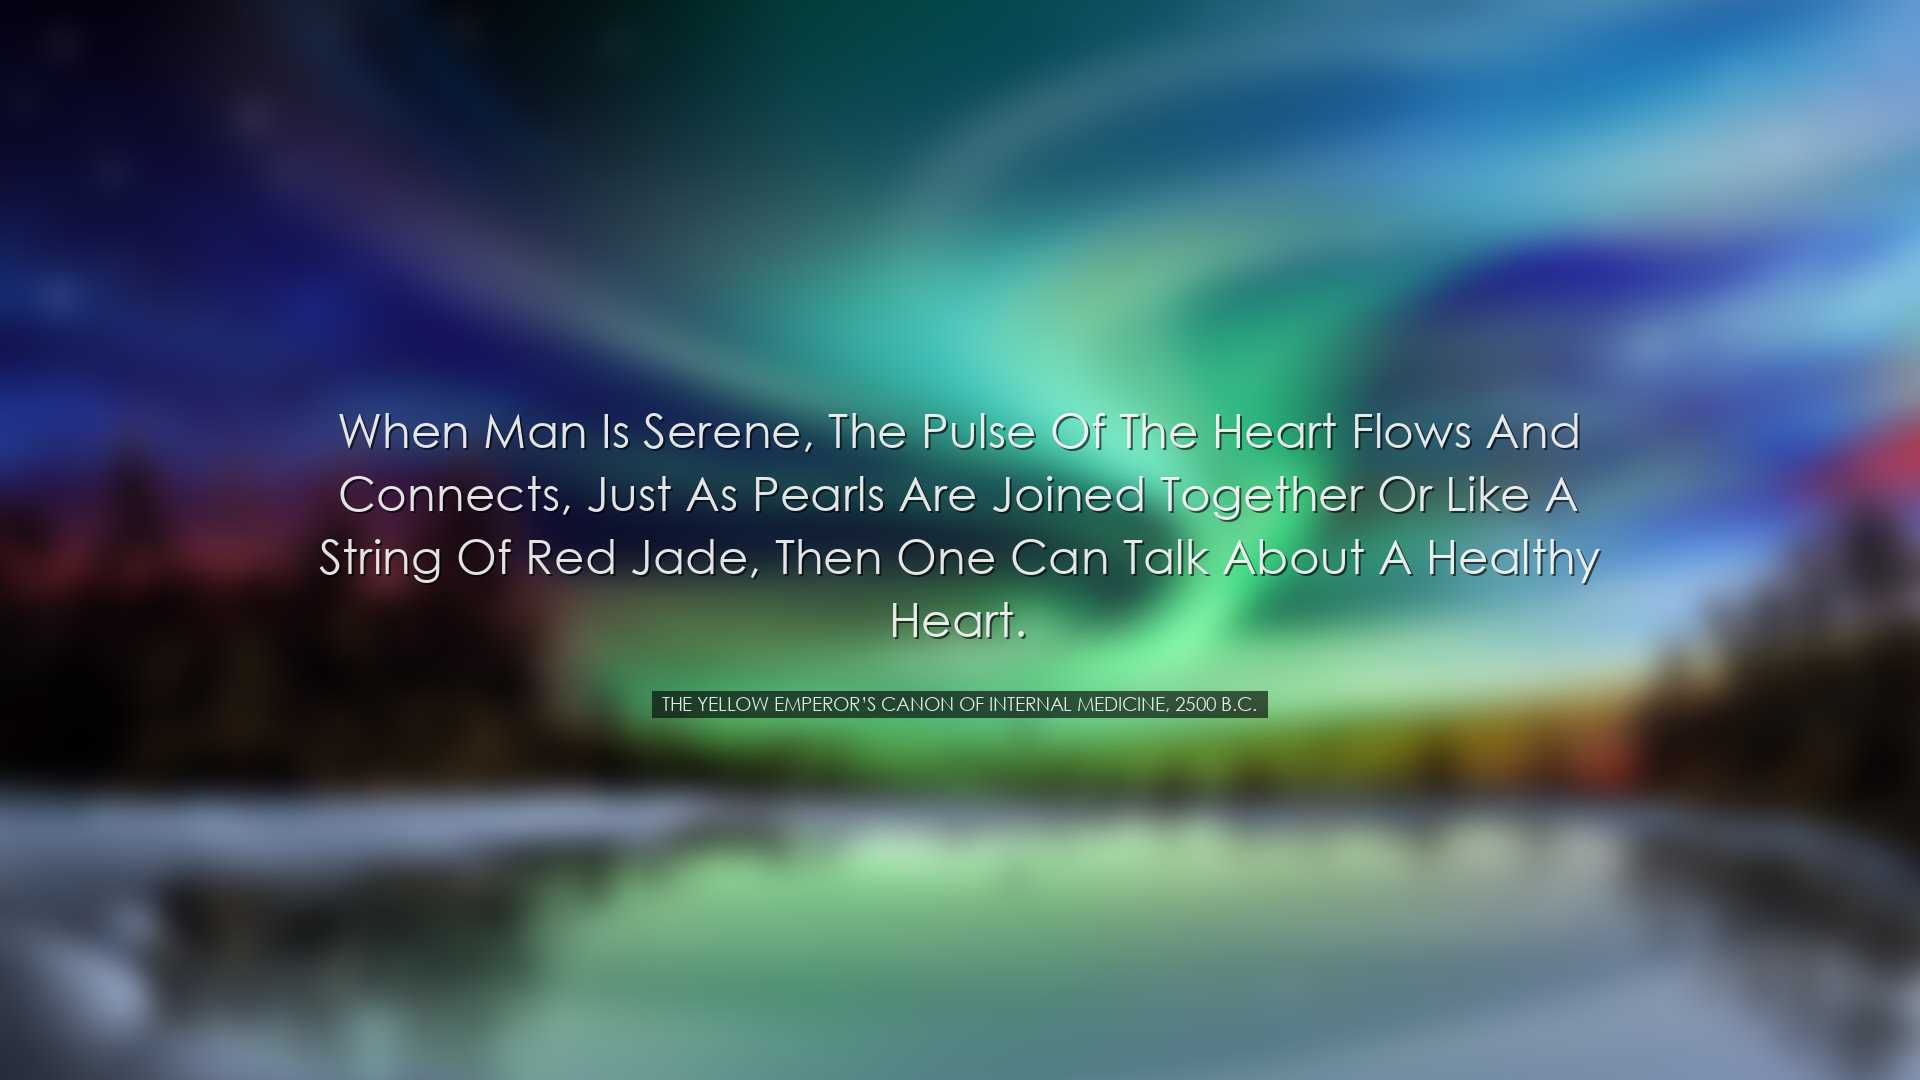 When man is serene, the pulse of the heart flows and connects, jus